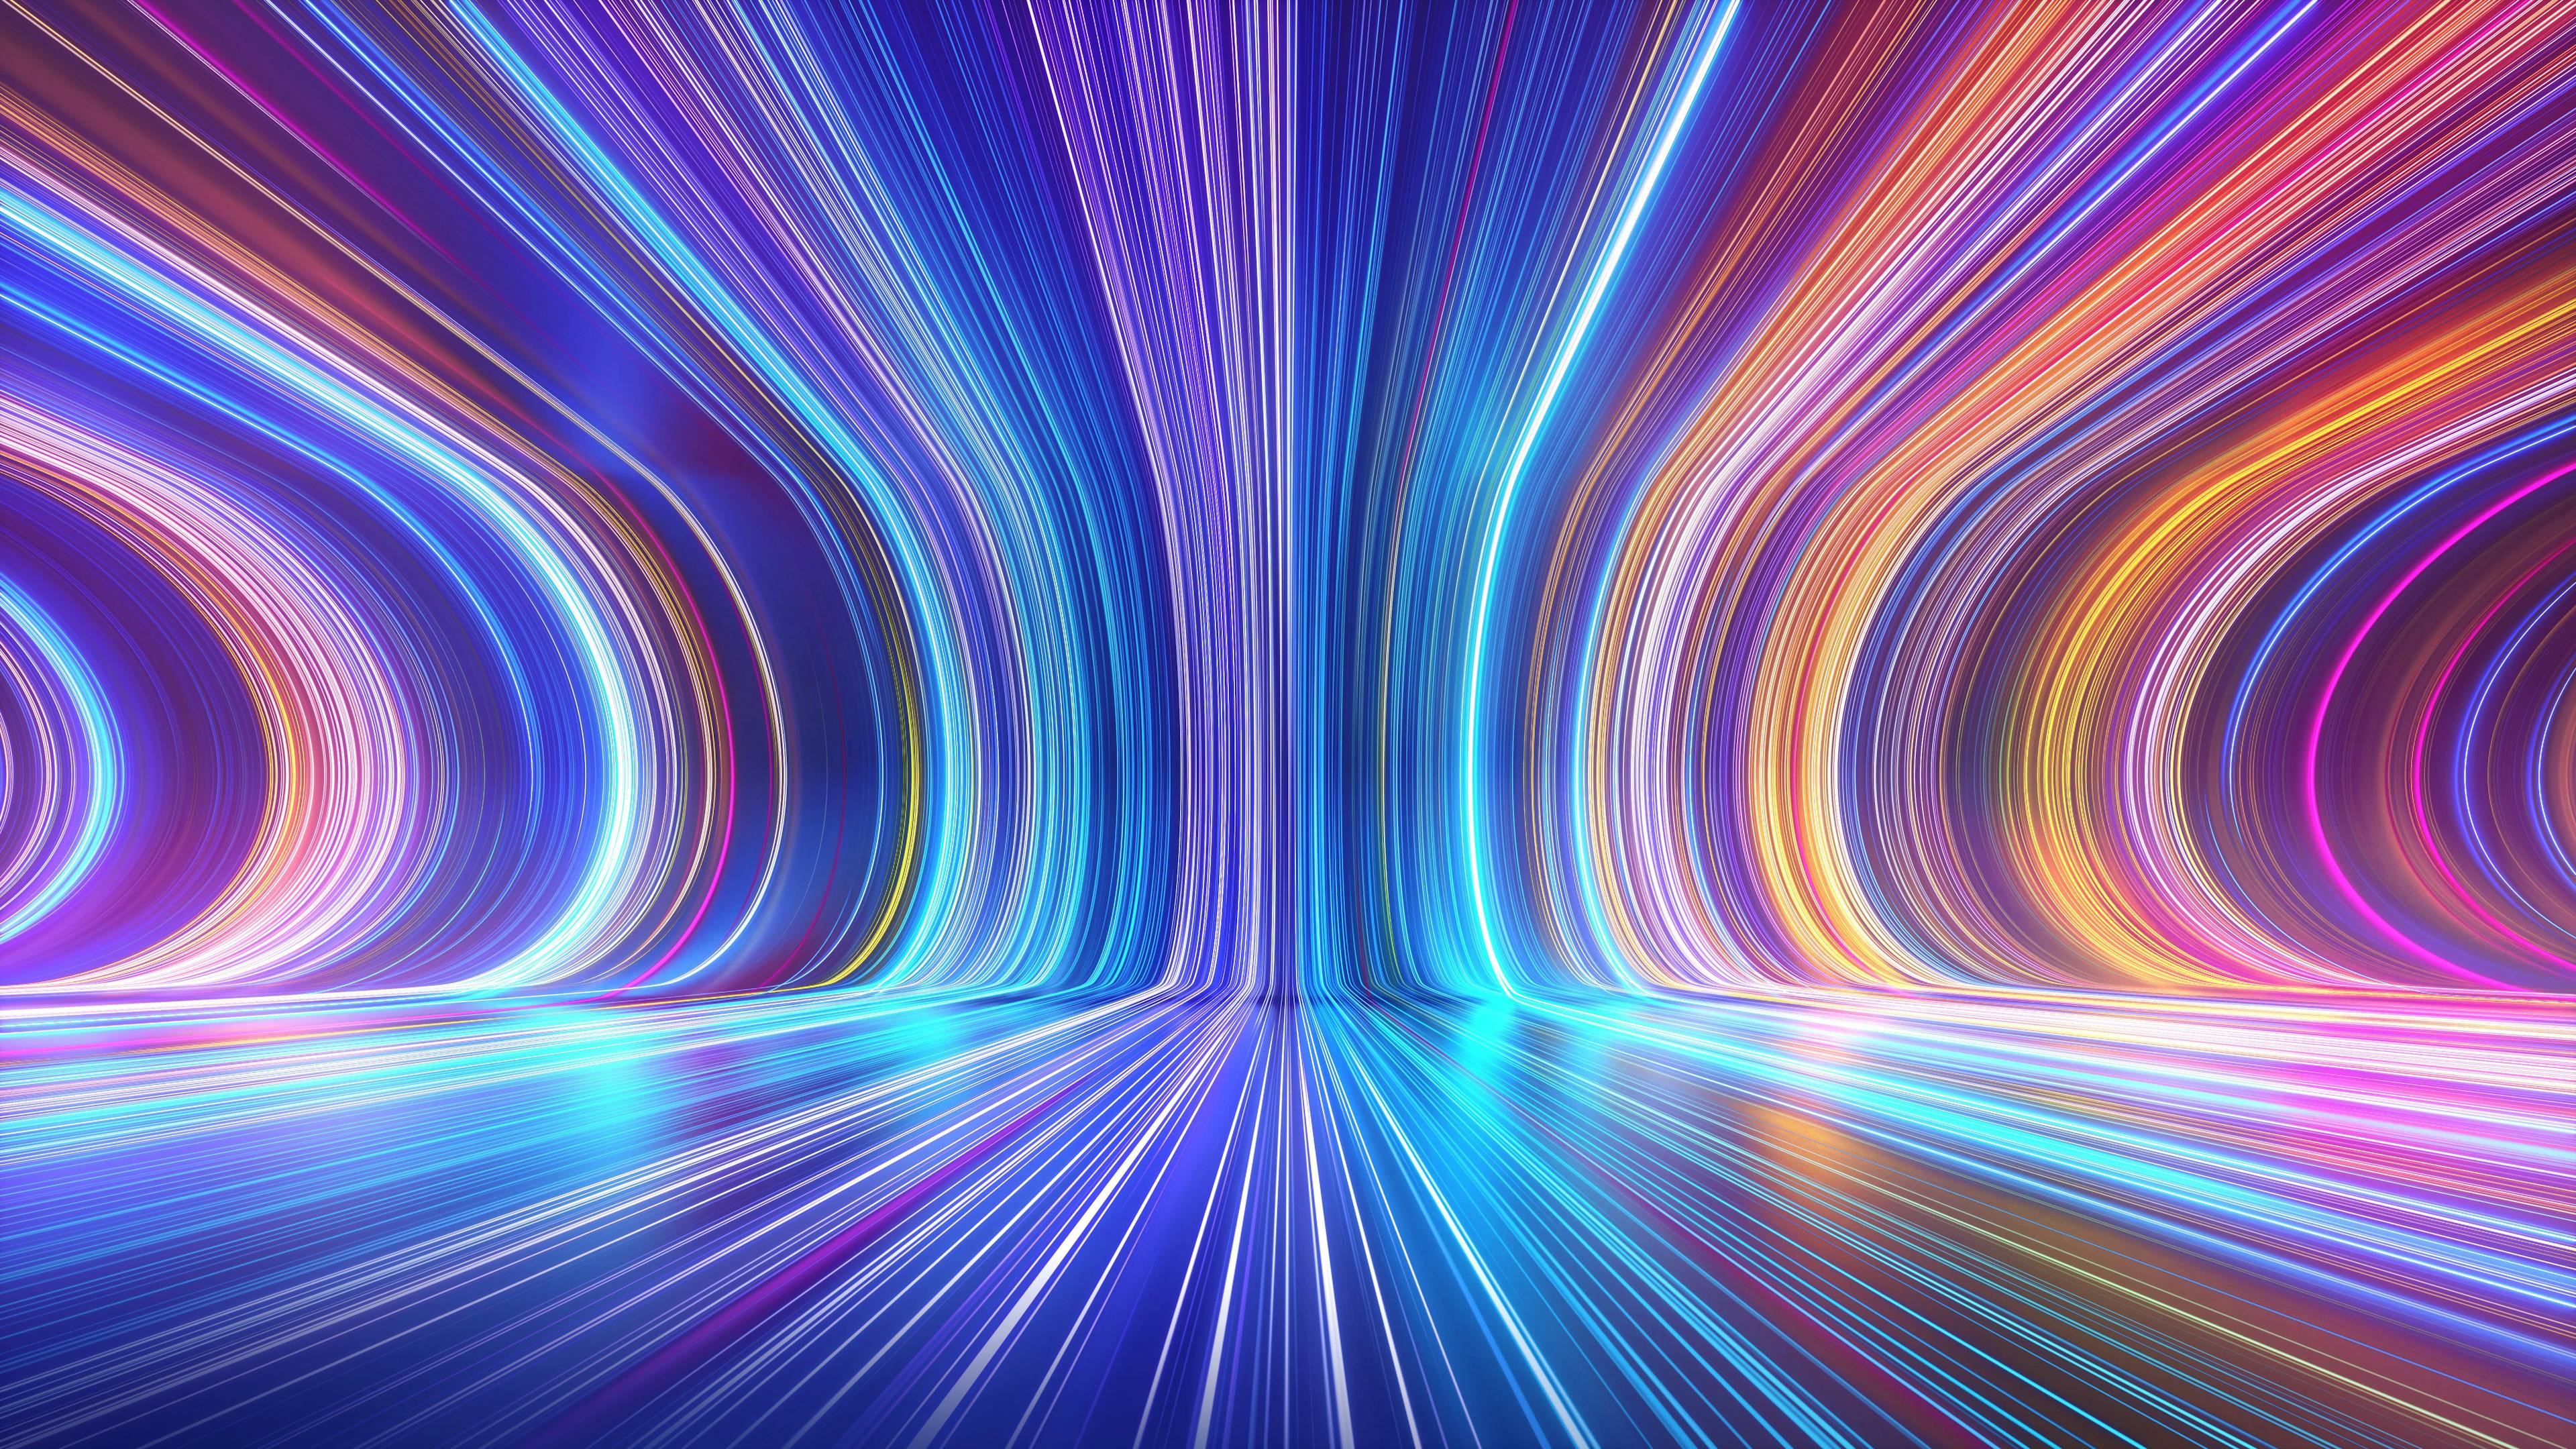 3d render, abstract multicolor spectrum background, bright orange blue neon rays and colorful glowing lines | Image Credit: © NeoLeo - stock.adobe.com